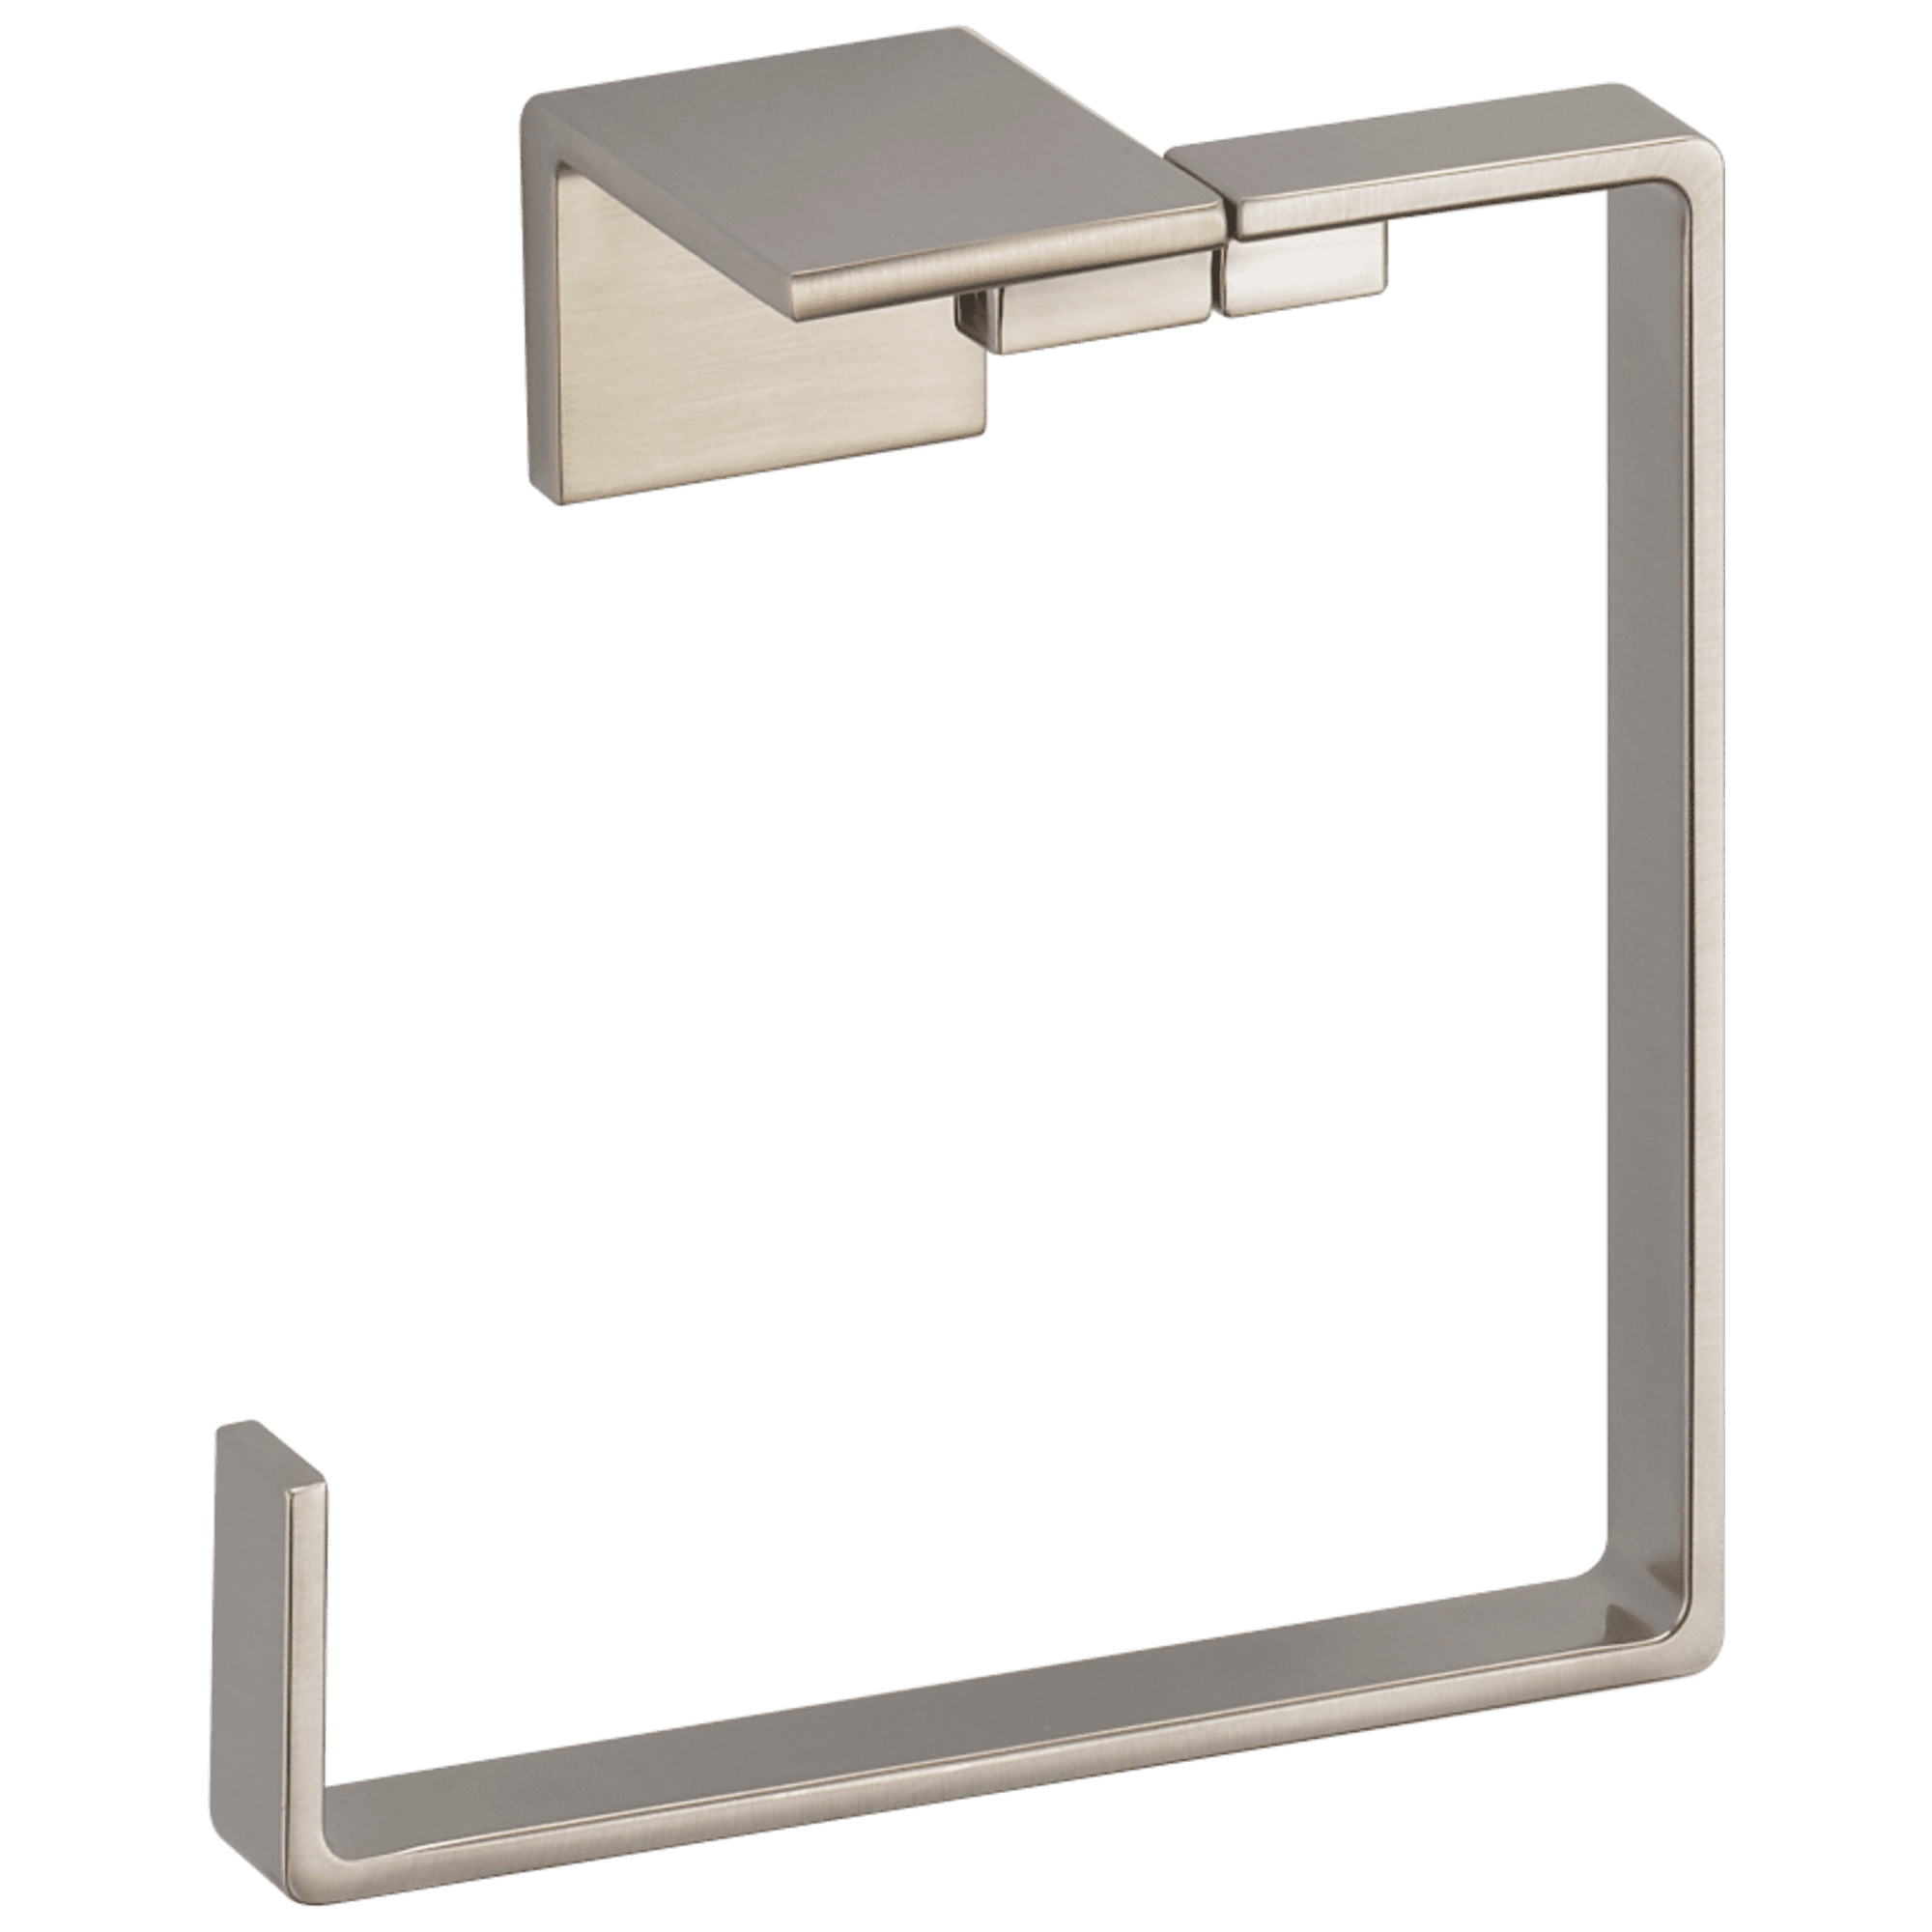 Delta 43124 24 in Exposed Mounting Towel Shelf in Chrome 